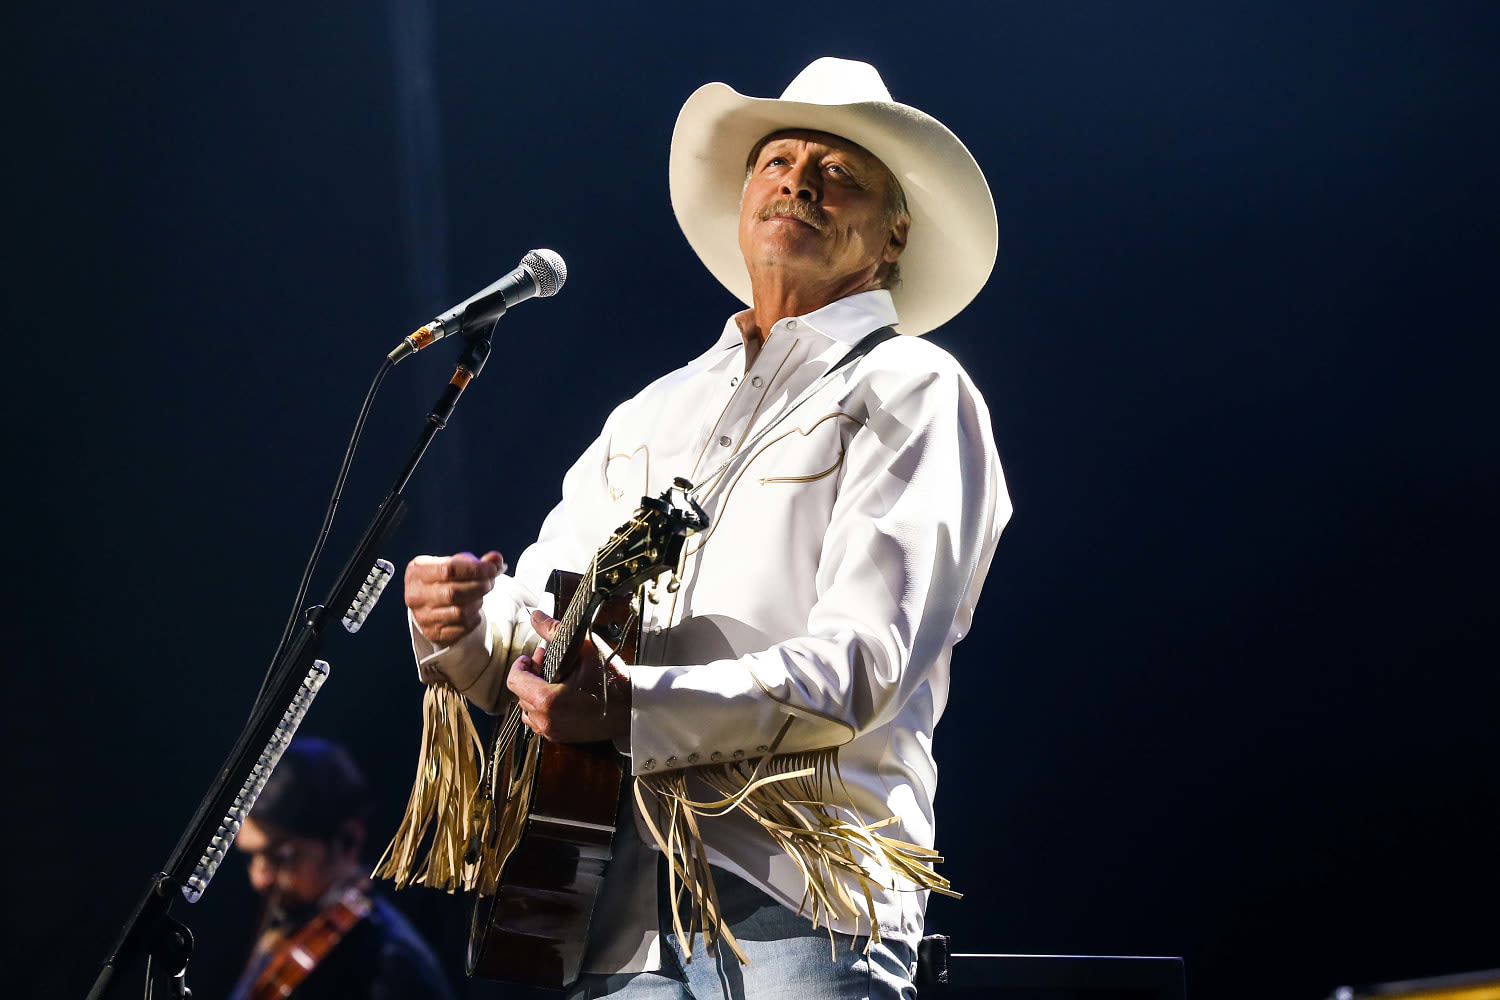 Alan Jackson's new tour dates give fans 'one final chance' to see him perform — what to know